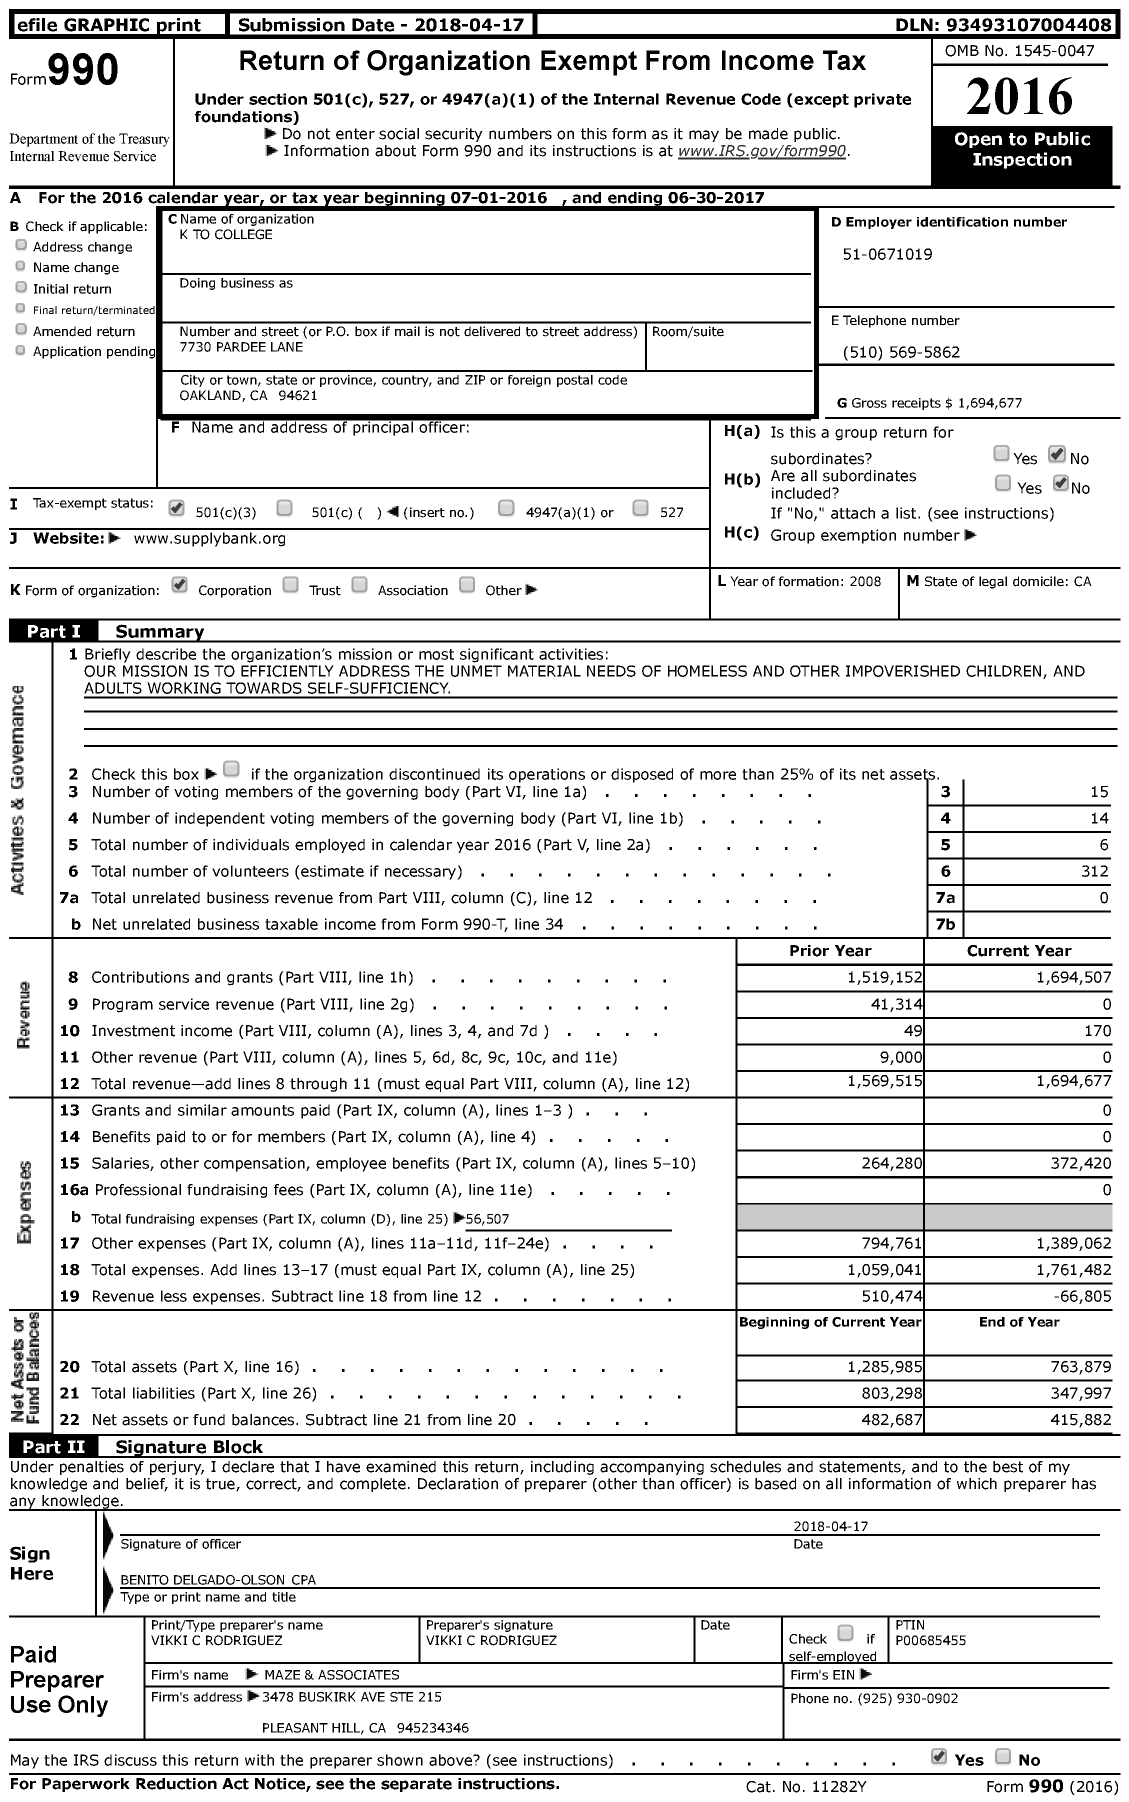 Image of first page of 2016 Form 990 for Supplybankorg